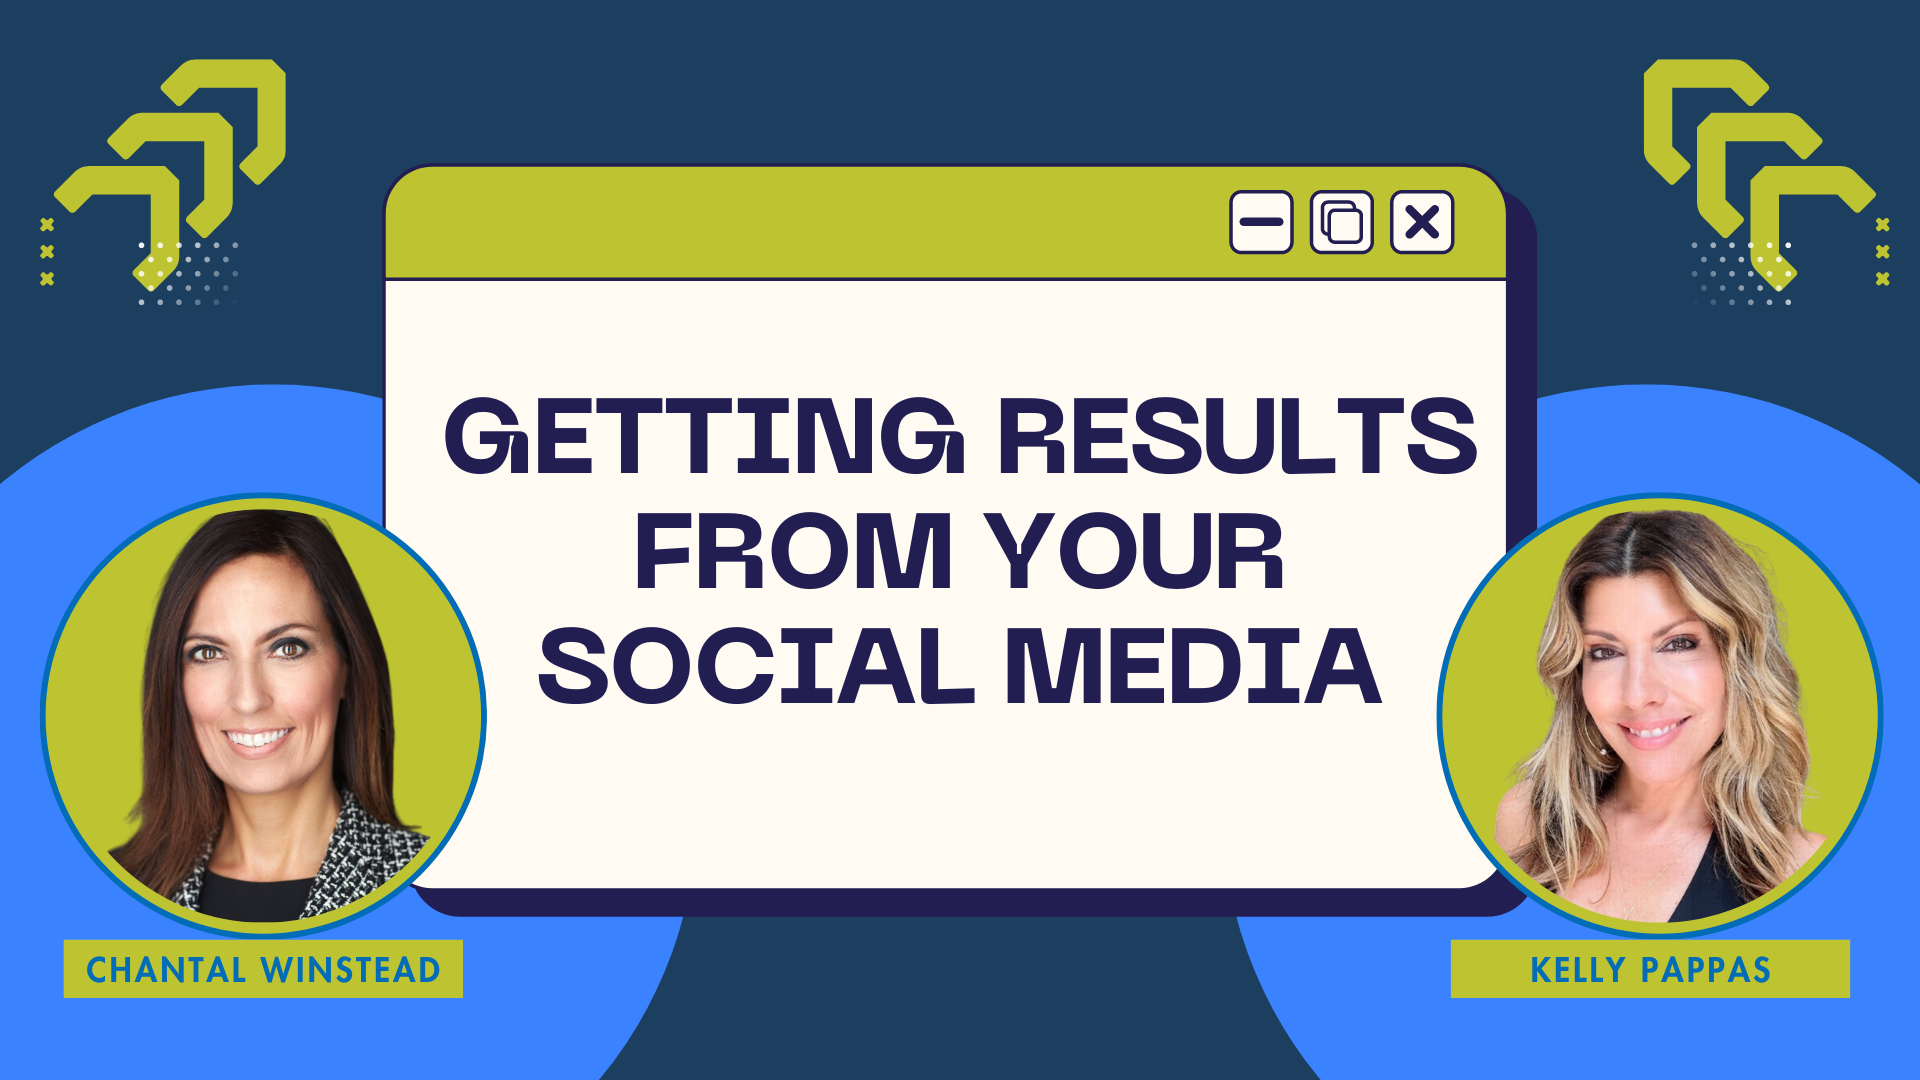 Getting results from your social media